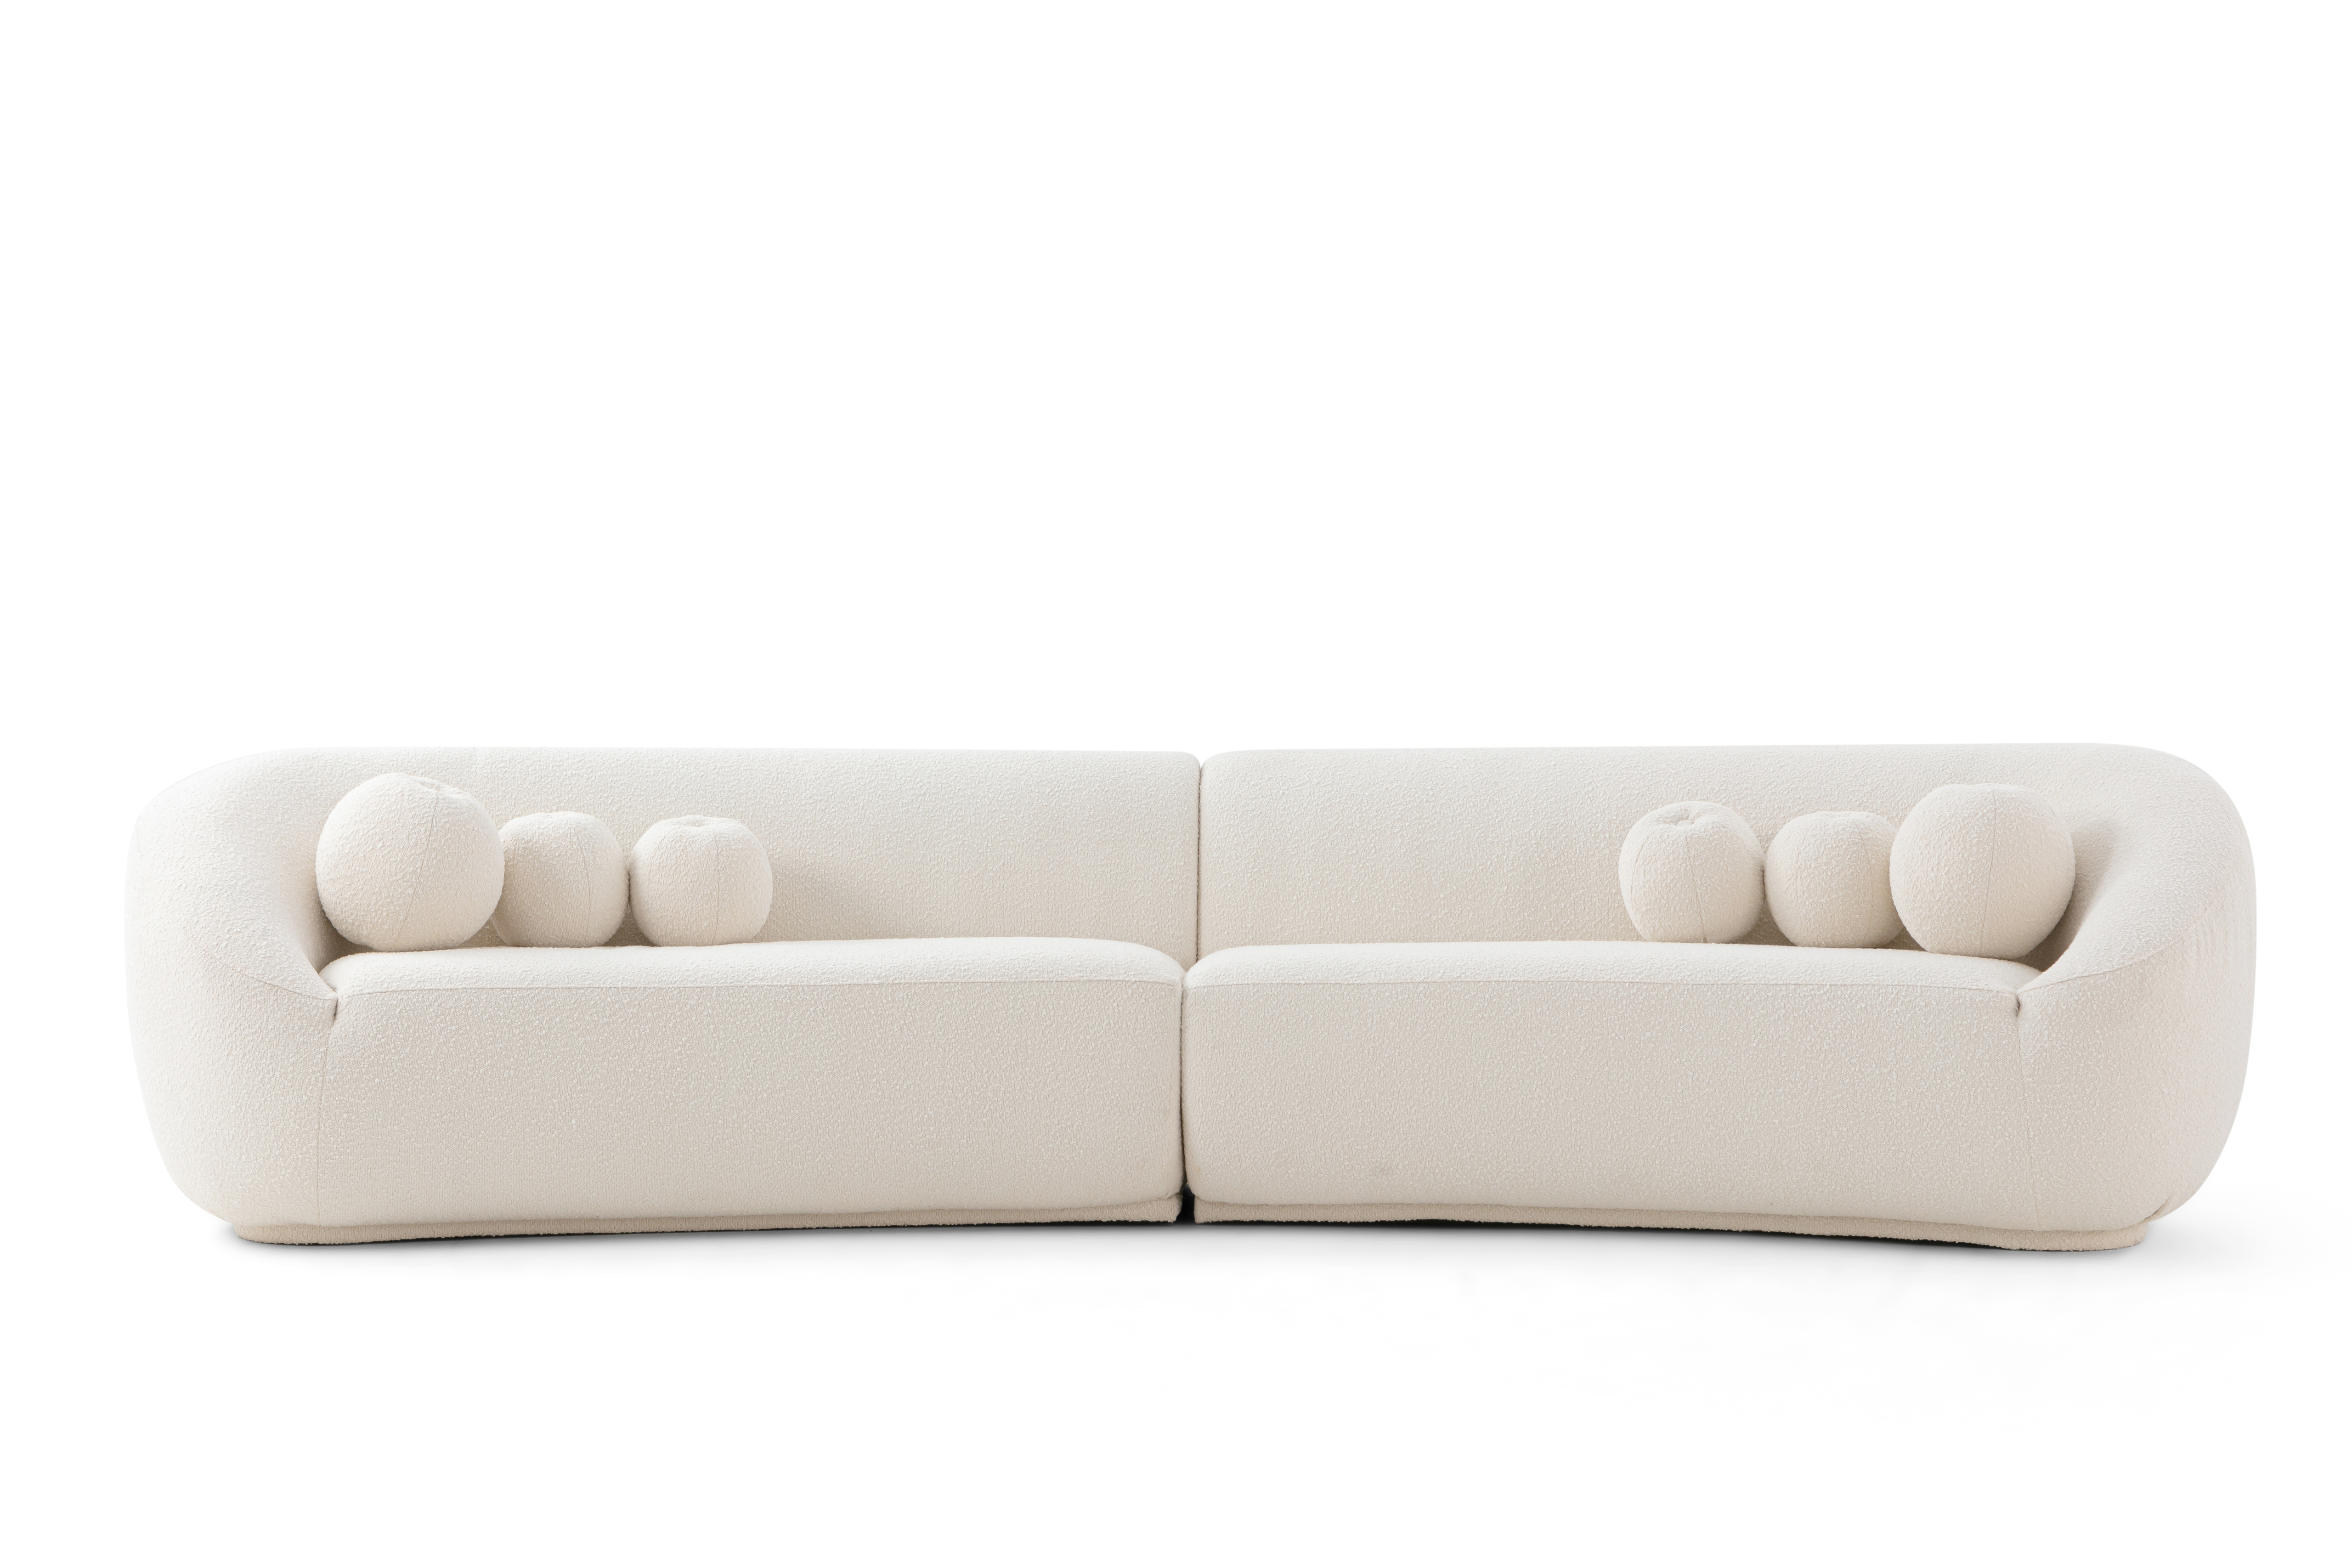 Blanc Moon is a floor style component series which items can be added to change the shape and configuration. This series uses a right and left armed sofa options to create a full backed long sofa. The base is the series is a large seat cushion built into the frame. Smooth rounded back and curved arms bring an understated elegance and modern flare to the series. Included are three round pillows.